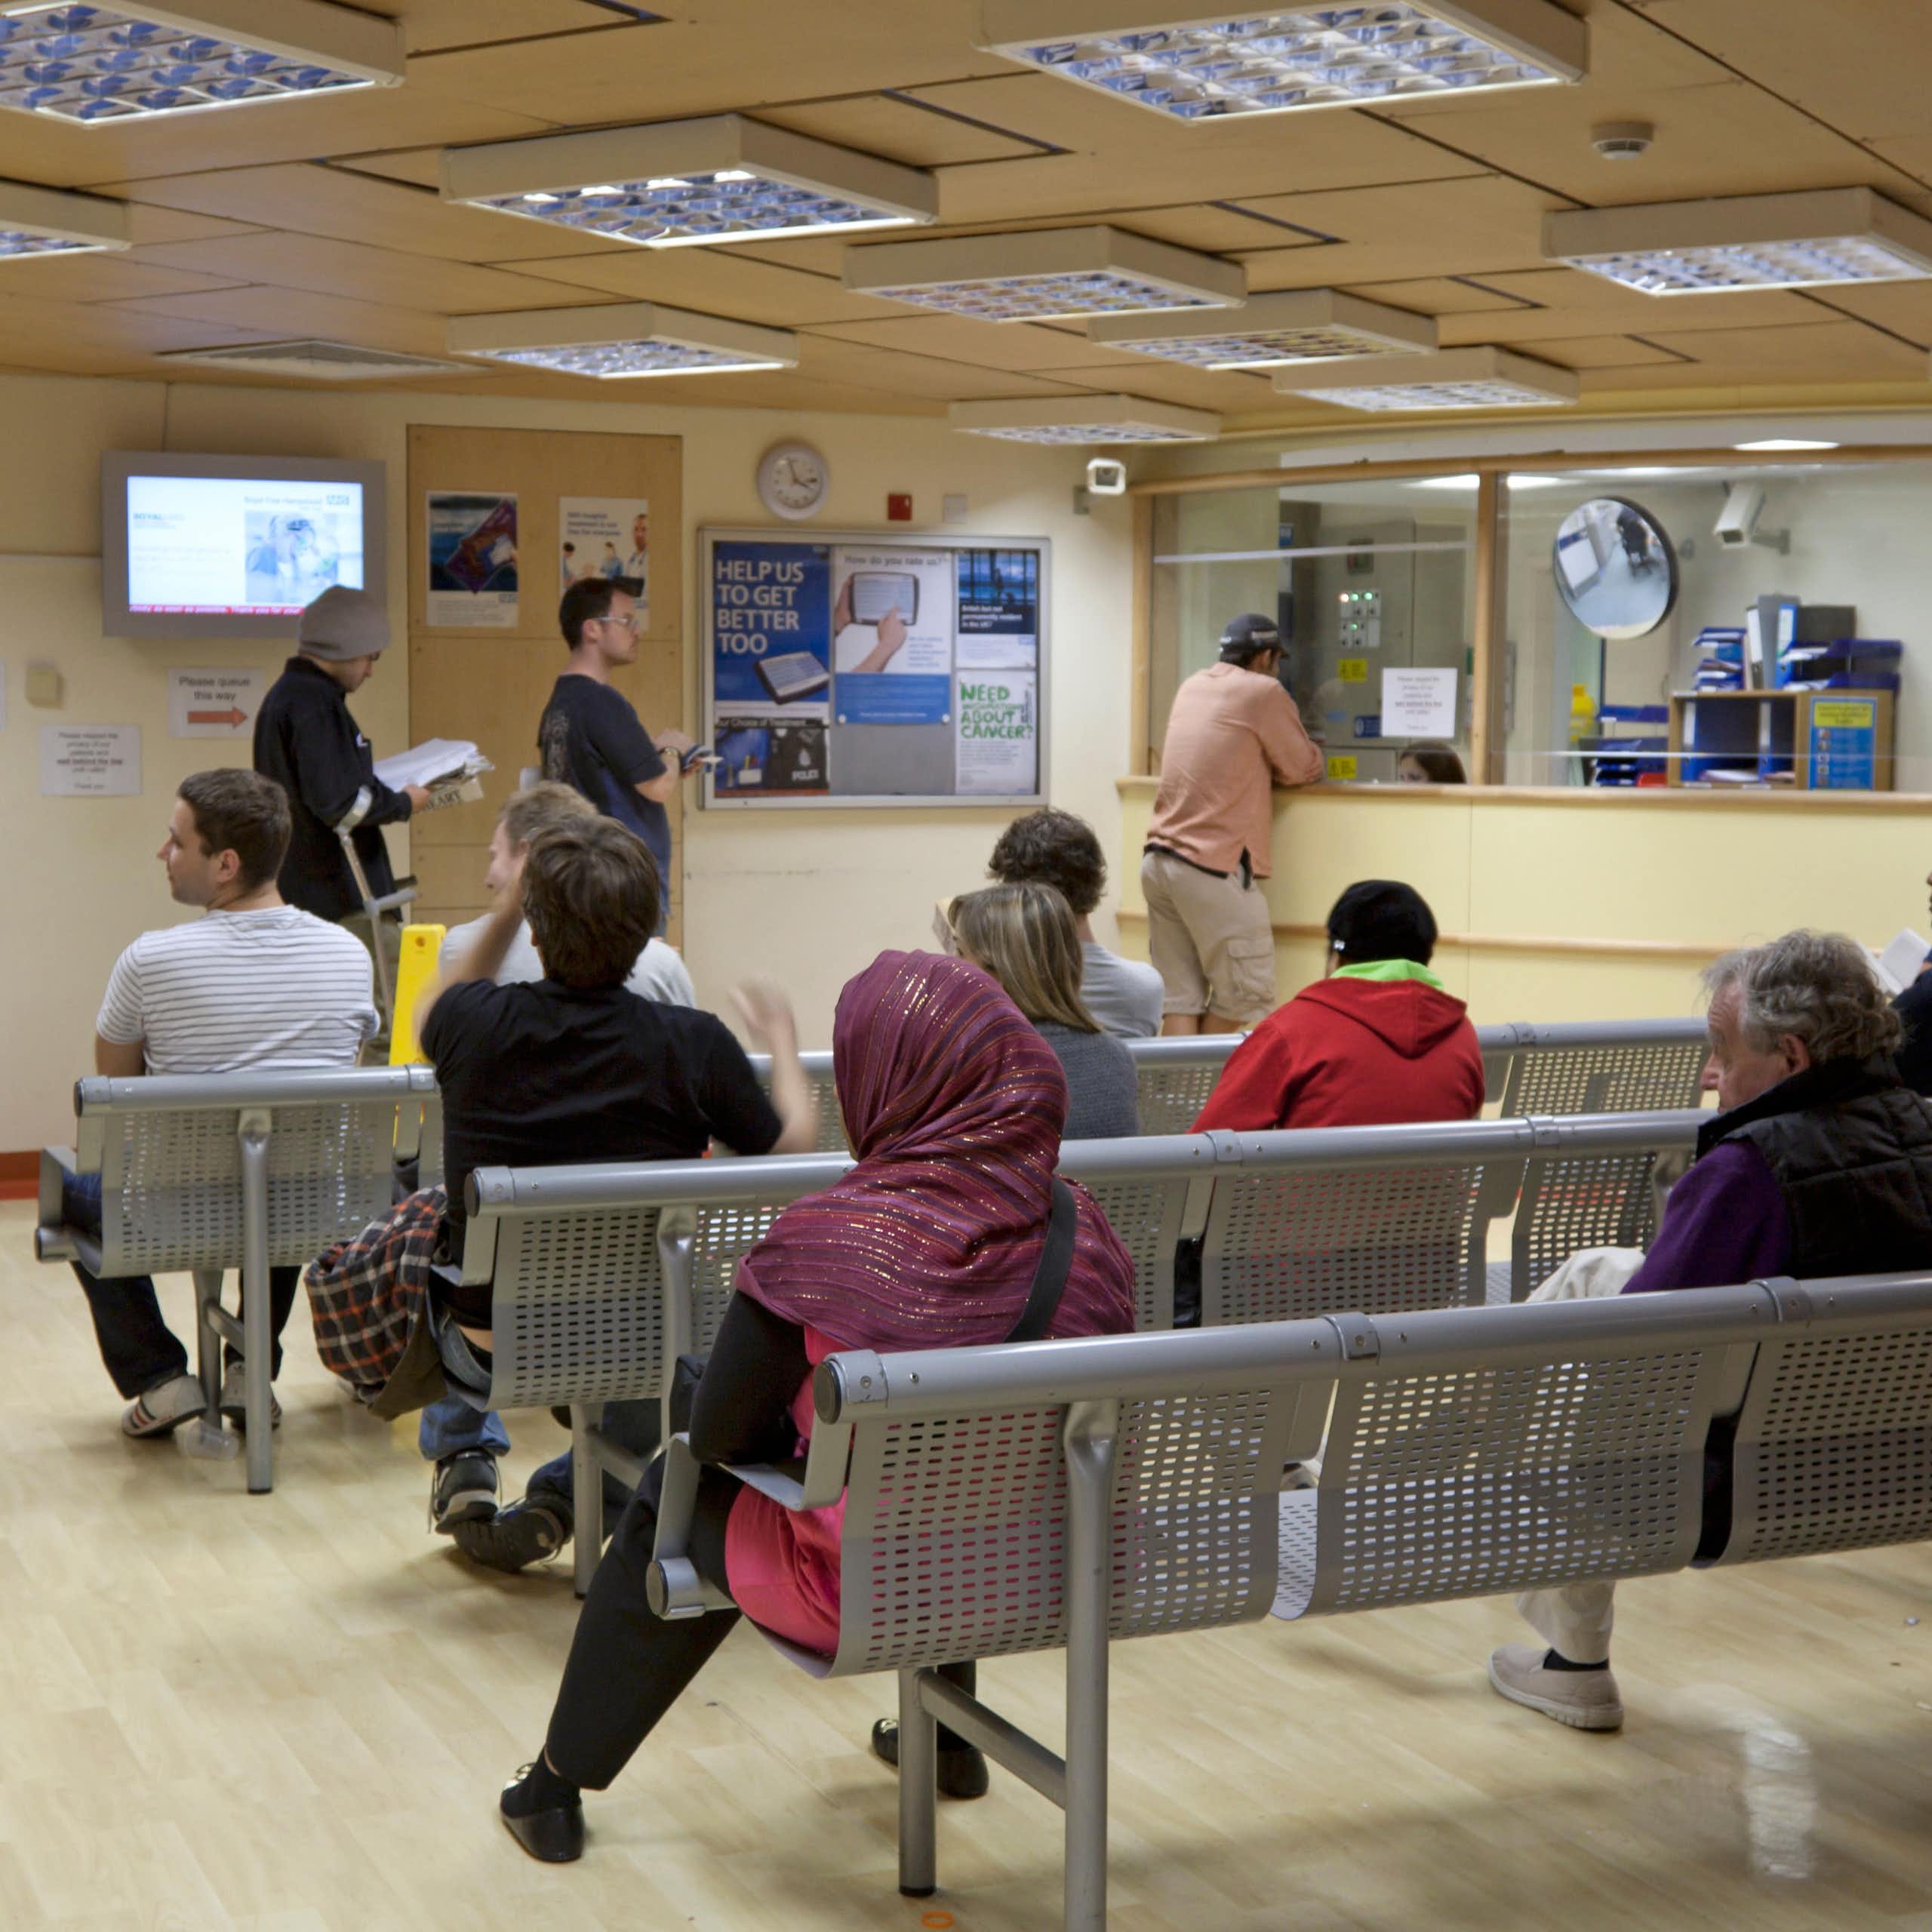 People in the waiting room at the Royal Free Hospital in London